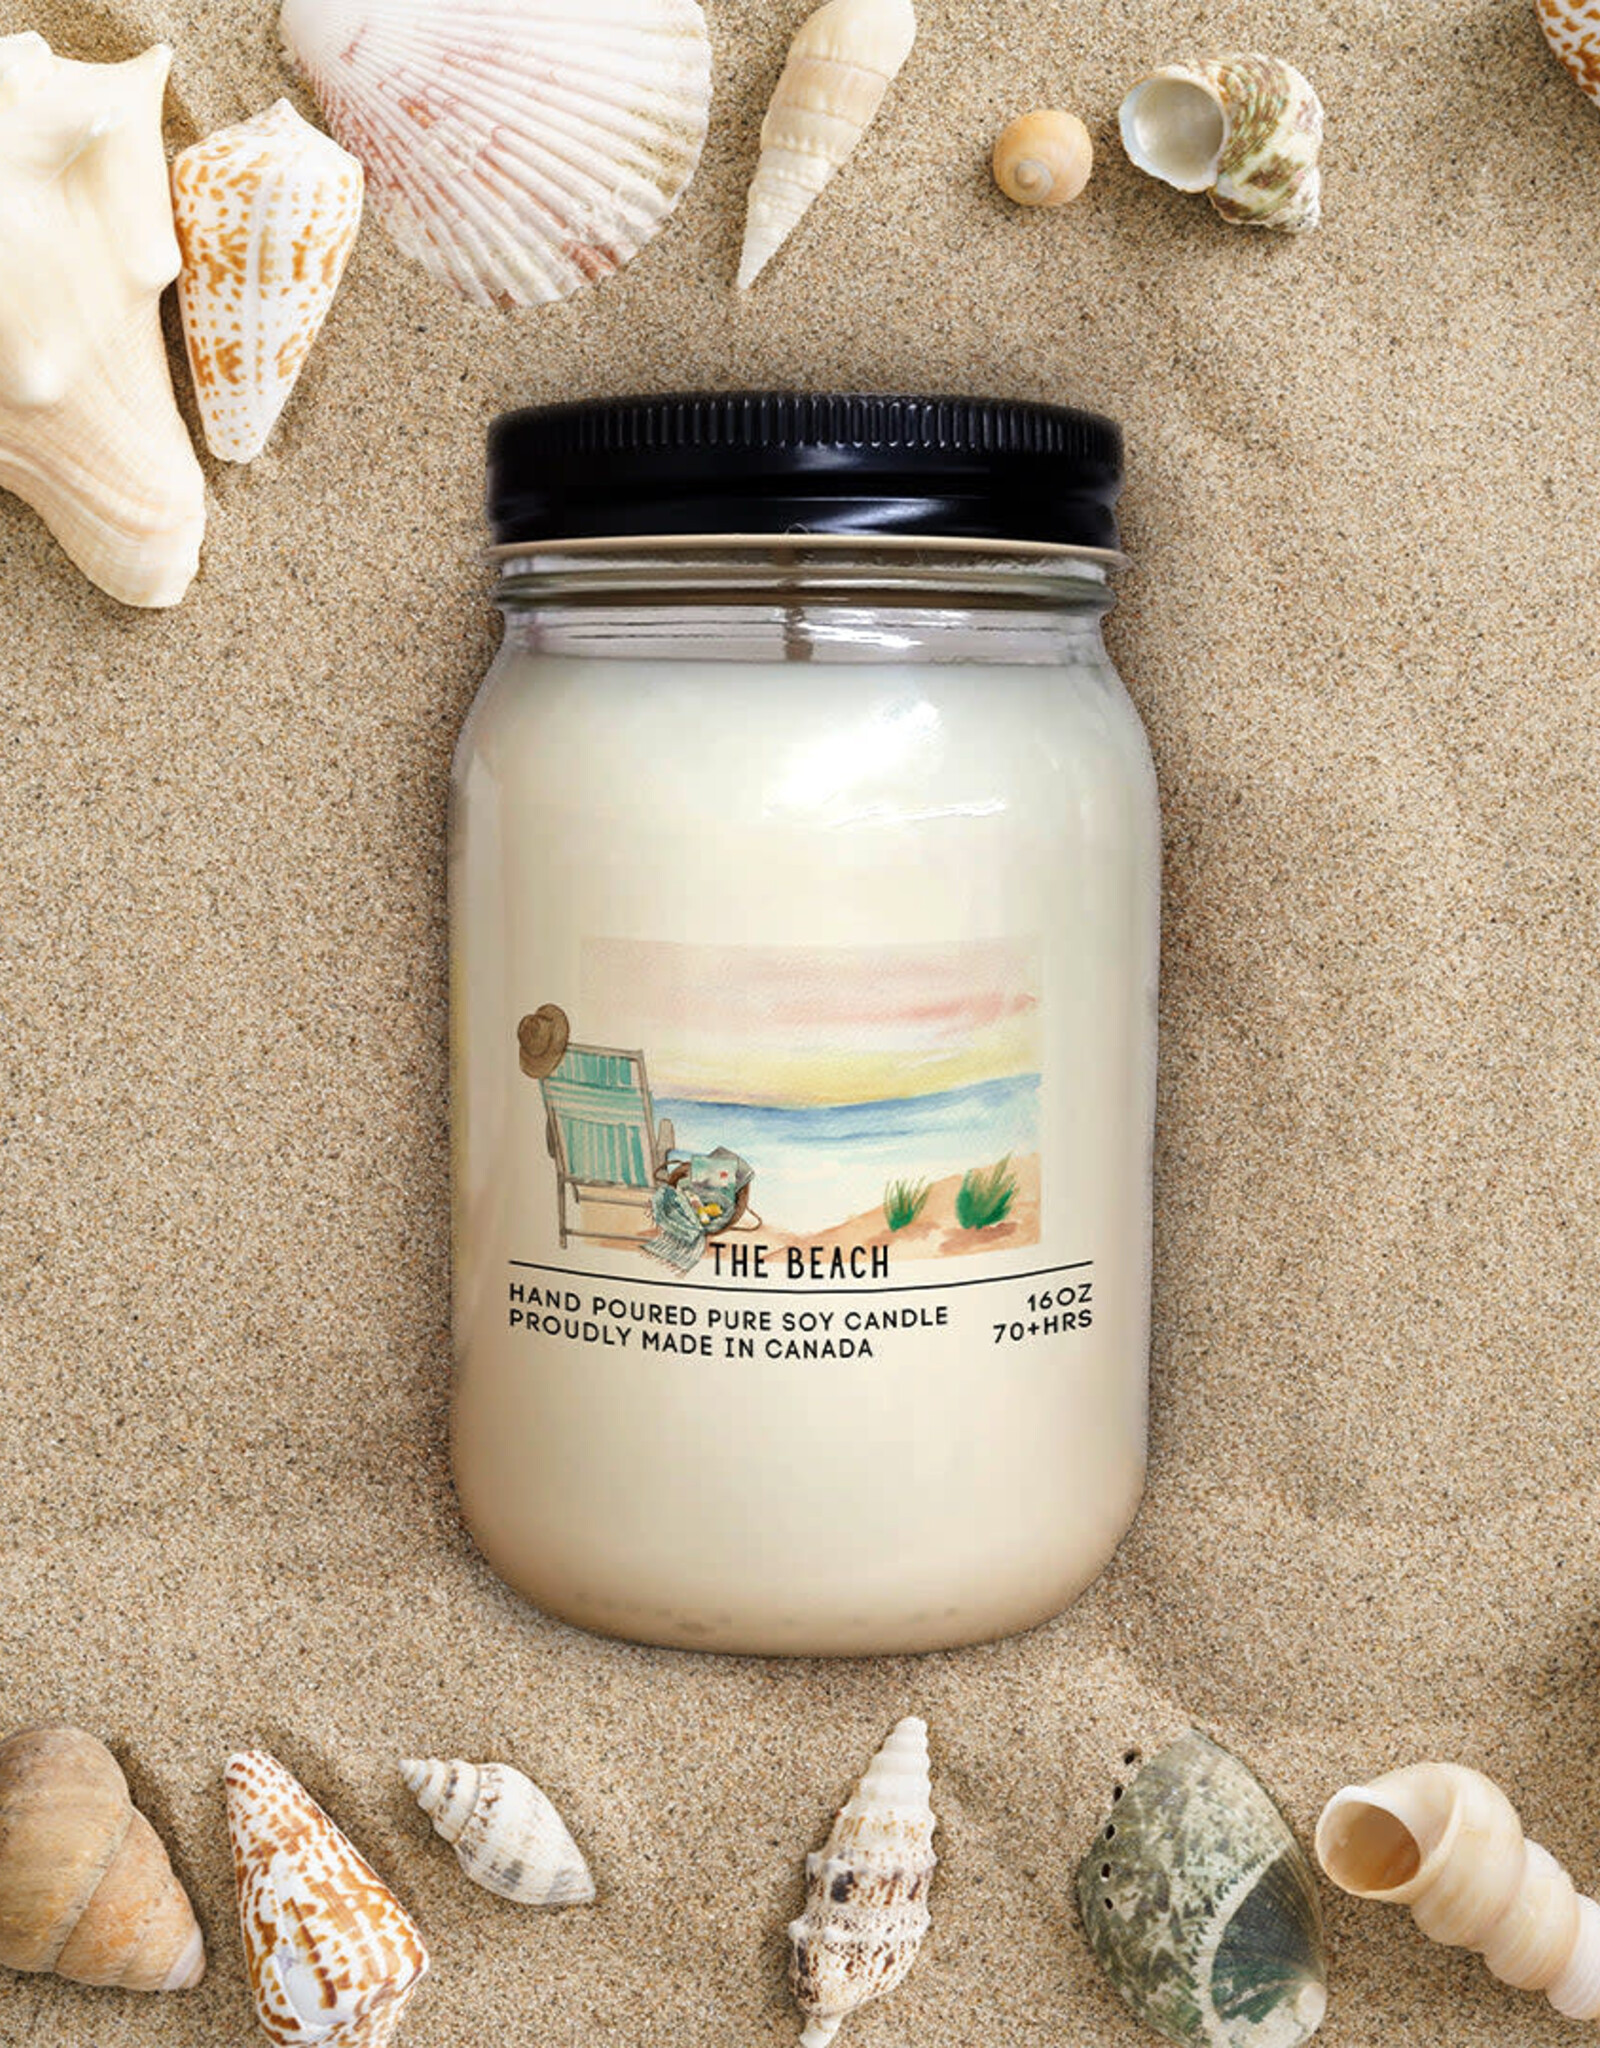 Serendipity Soy Candles 16oz Jar Candle - The Beach